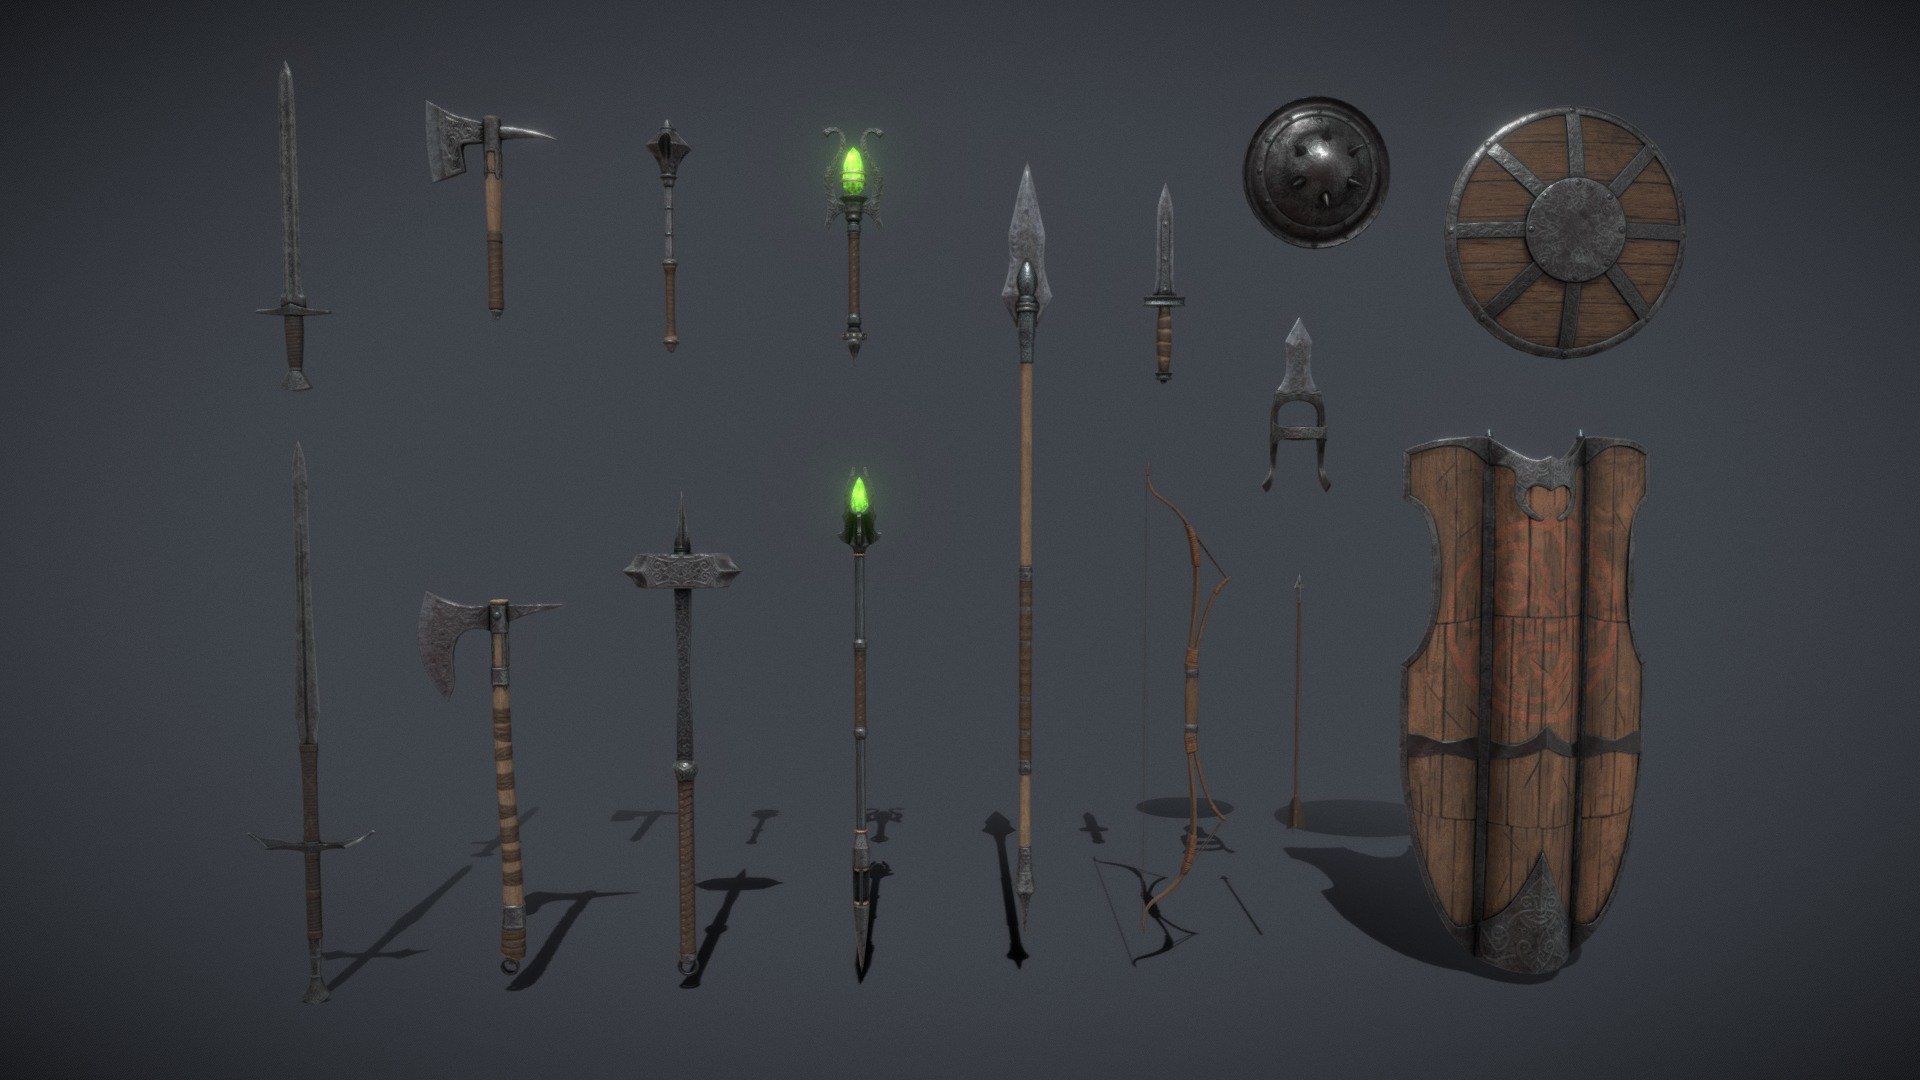 Iron Fantasy Weapon Set

A set of fantasy Iron weapons.
The set consists of sixteen unique objects.
PBR textures have a resolution of 2048x2048.
Total polygons: 33388 triangles; 16874 vertices.

1) Sword (one-handed) - 1308 tris
2) Sword (two-handed) - 2064 tris
3) Mace (one-handed) - 1464 tris
4) Mace (two-handed) - 1384 tris
5) Ax (one-handed) - 1064 tris
6) Ax (two-handed) - 3016 tris
7) Lance - 1828 tris
8) Dagger - 1284 tris
9) Brass knuckles - 1500 tris
10) Bow - 2788 tris
11) Staff - 3100 tris
12) Scepter - 3136 tris
13) Shield (small) - 2052 tris
14) Shield (medium) - 2744 tris
15) Shield (great) - 4144 tris
16) Arrow - 512 tris

Archives with textures contain:

PNG textures for blender - base color, metallic, normal, roughness, opacity, glow

Texturing Unity (Metallic Smoothness) - AlbedoTransparency, MetallicSmoothness, Normal, Emission

Texturing Unreal Engine - BaseColor, Normal, OcclusionRoughnessMetallic, Emissive - Iron Weapons Fantasy Set - 3D model by zilbeerman 3d model